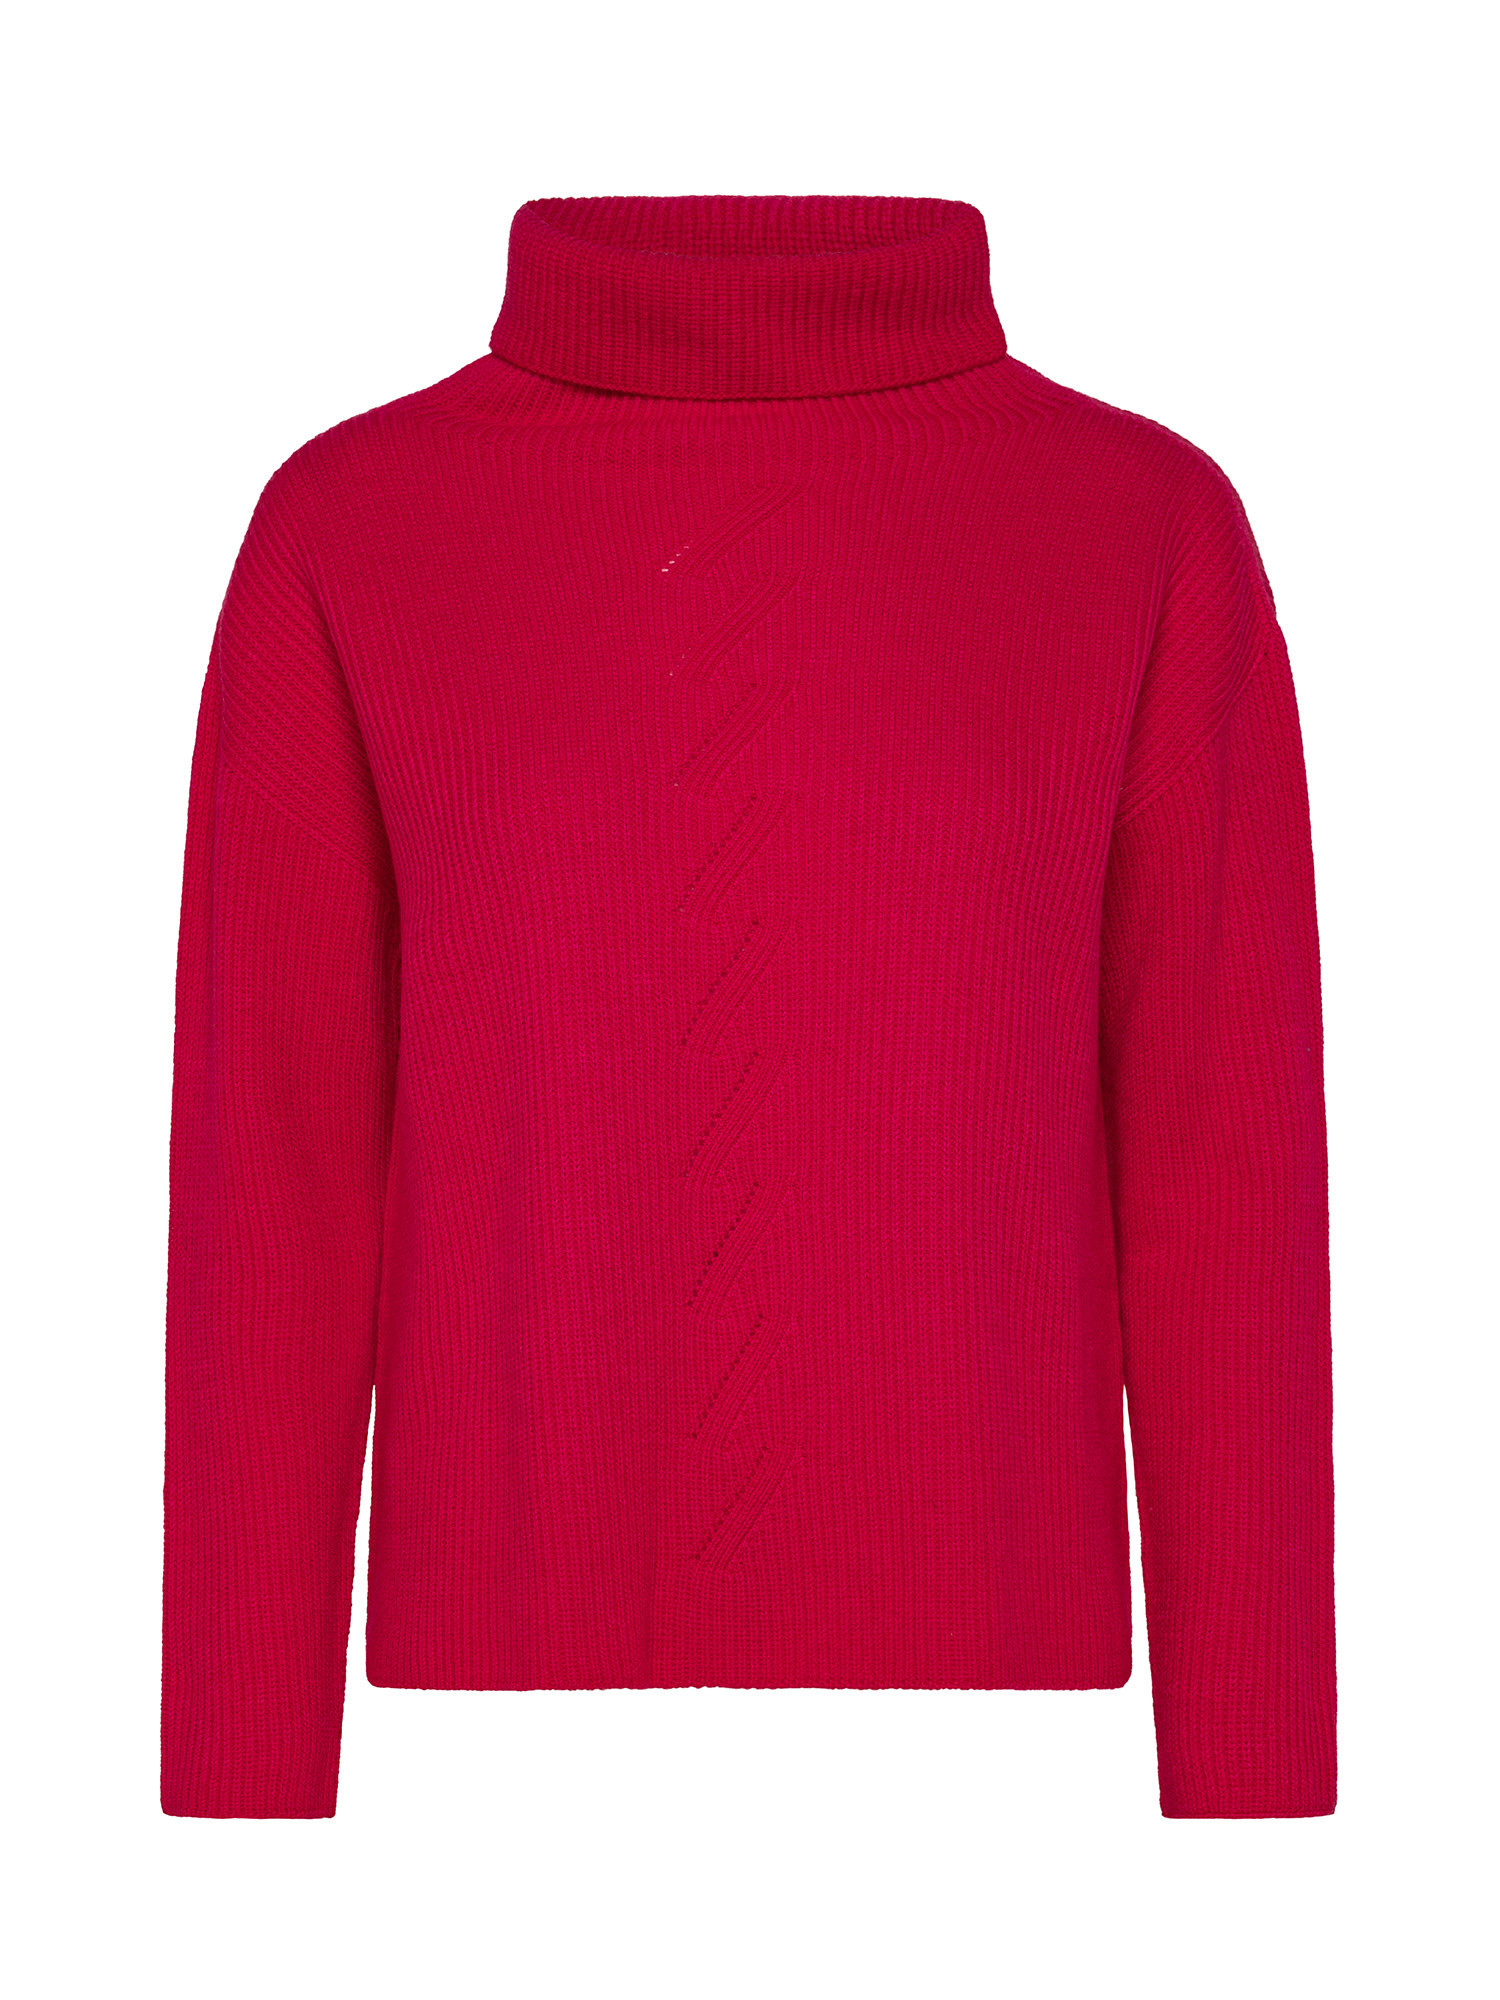 K Collection - Turtleneck pullover in extrafine wool, Pink Fuchsia, large image number 0